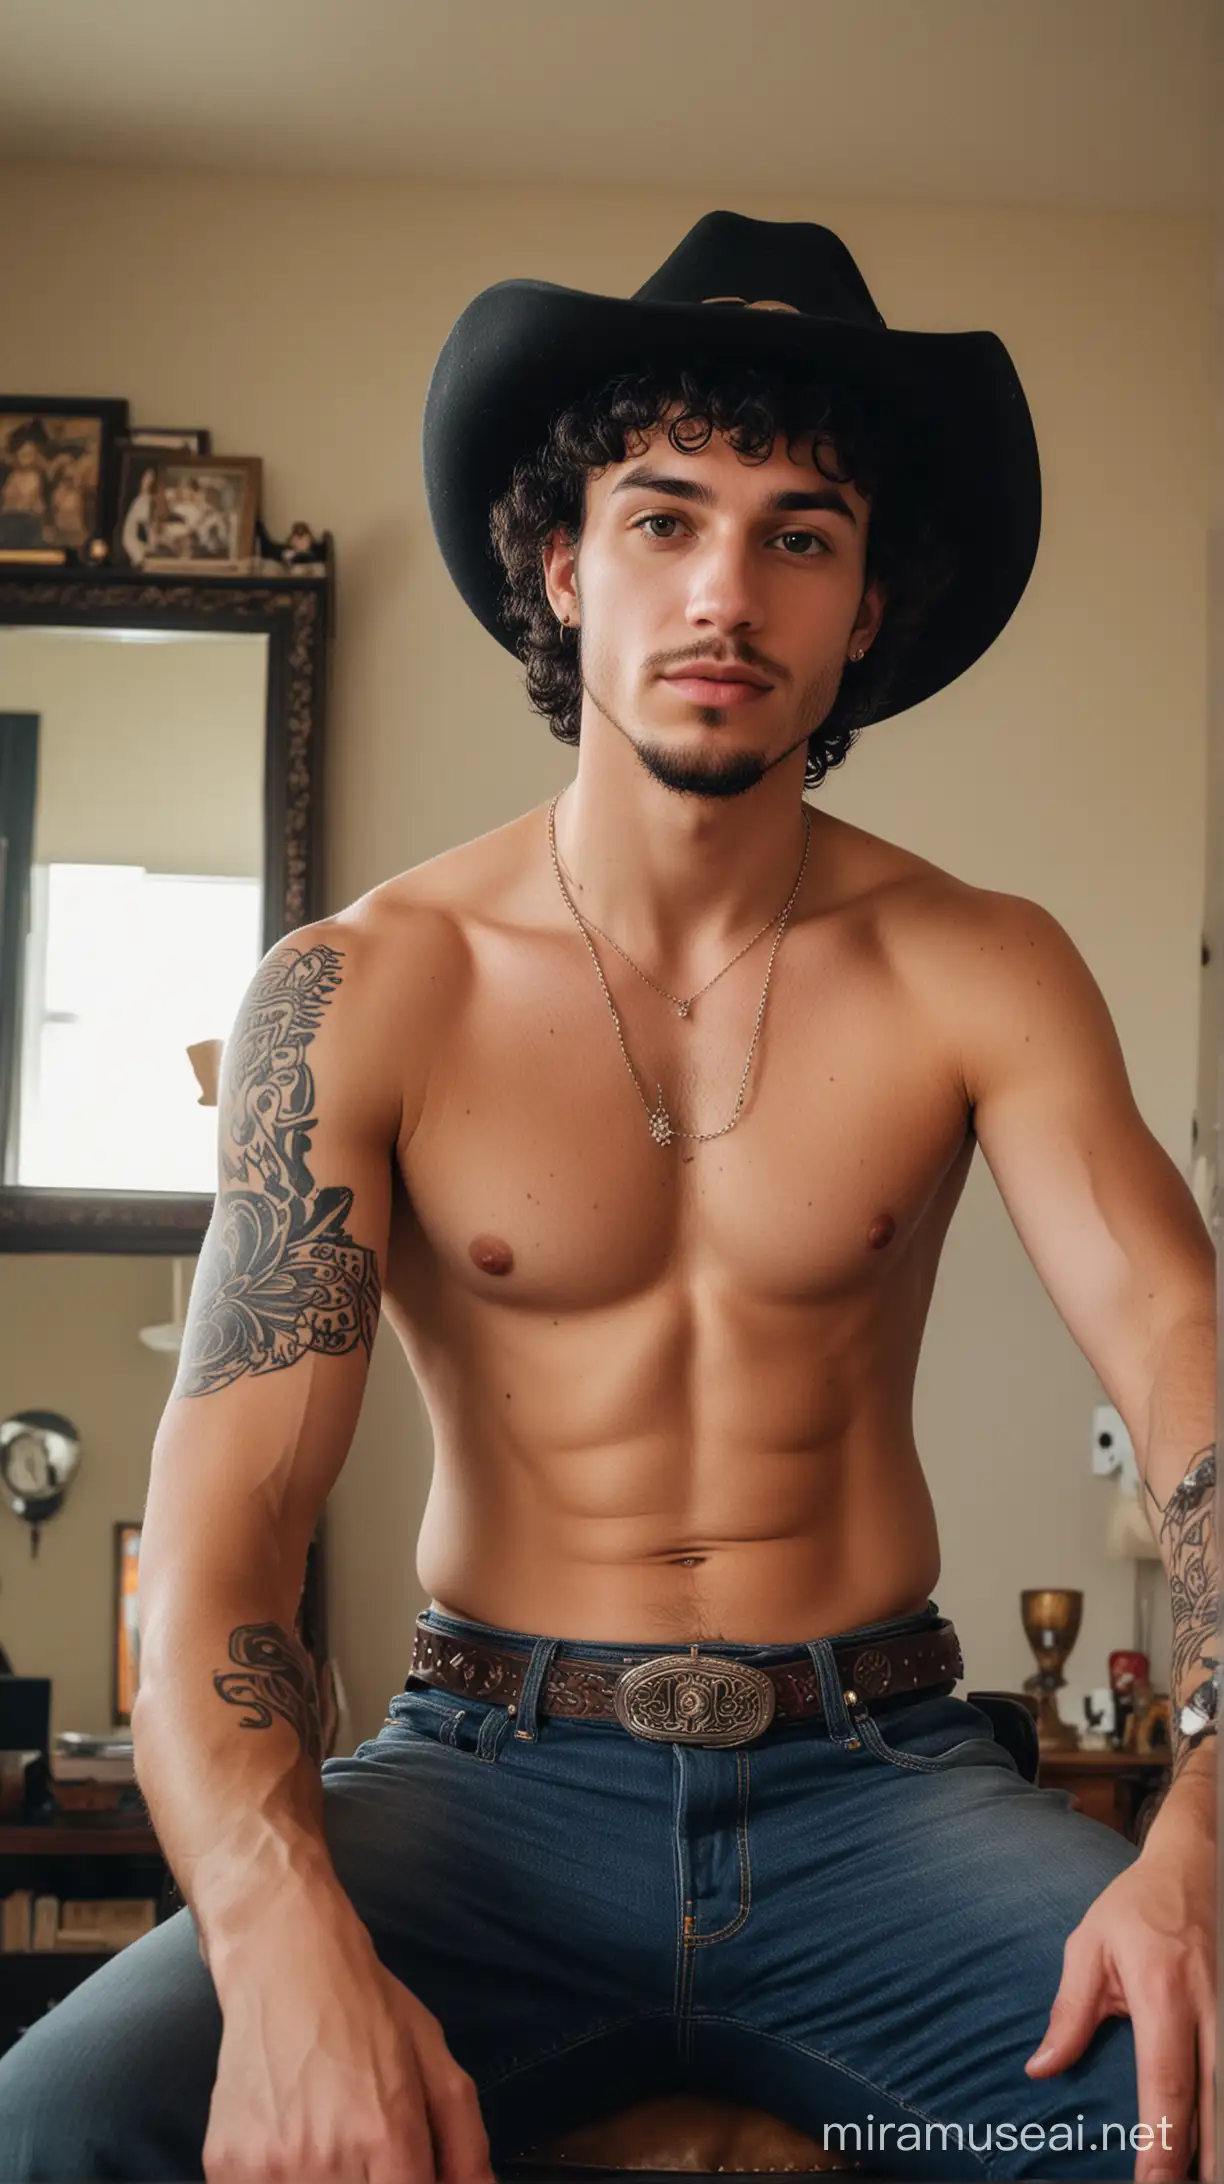 A 25-year-old Elijah with short curly black hair, tattoos, ancient jewelry, Ancient Tattoos, leaning back in his gaming chair, erection, mirror selfie, covering himself with a cowboy hat, led lights on wall, head tilted at an acute angle, Ambient Bedroom, Gamer Streamer Set-up,Holding iPhone to take mirror selfie, 8K resolution, wide angle shot